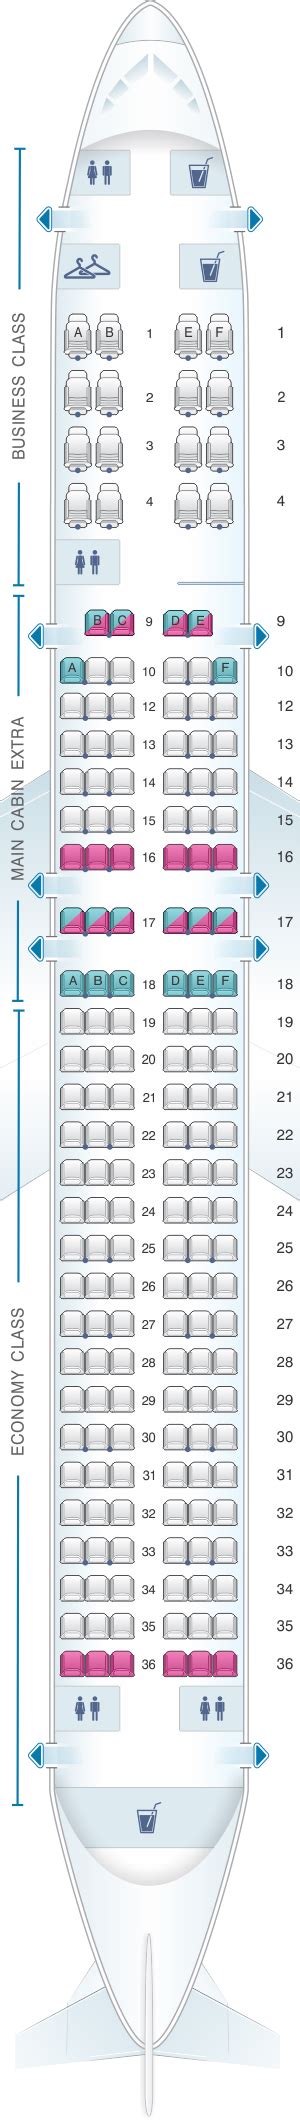 American Boeing 757 200 Seating Chart Elcho Table